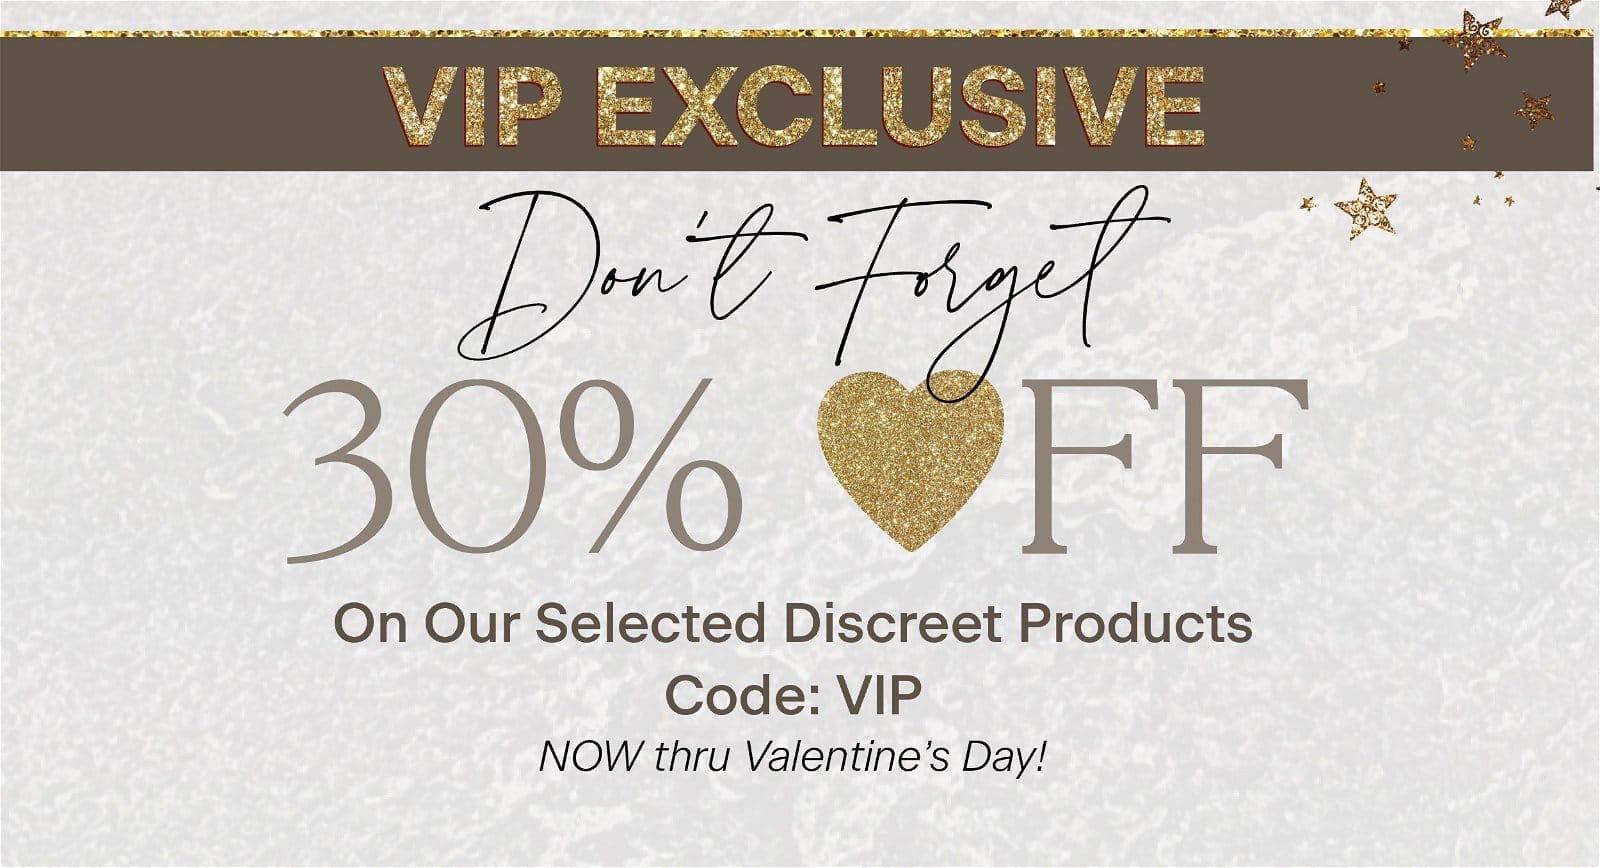 VIP Exclusive 30% off our selected discreet products code:VIP